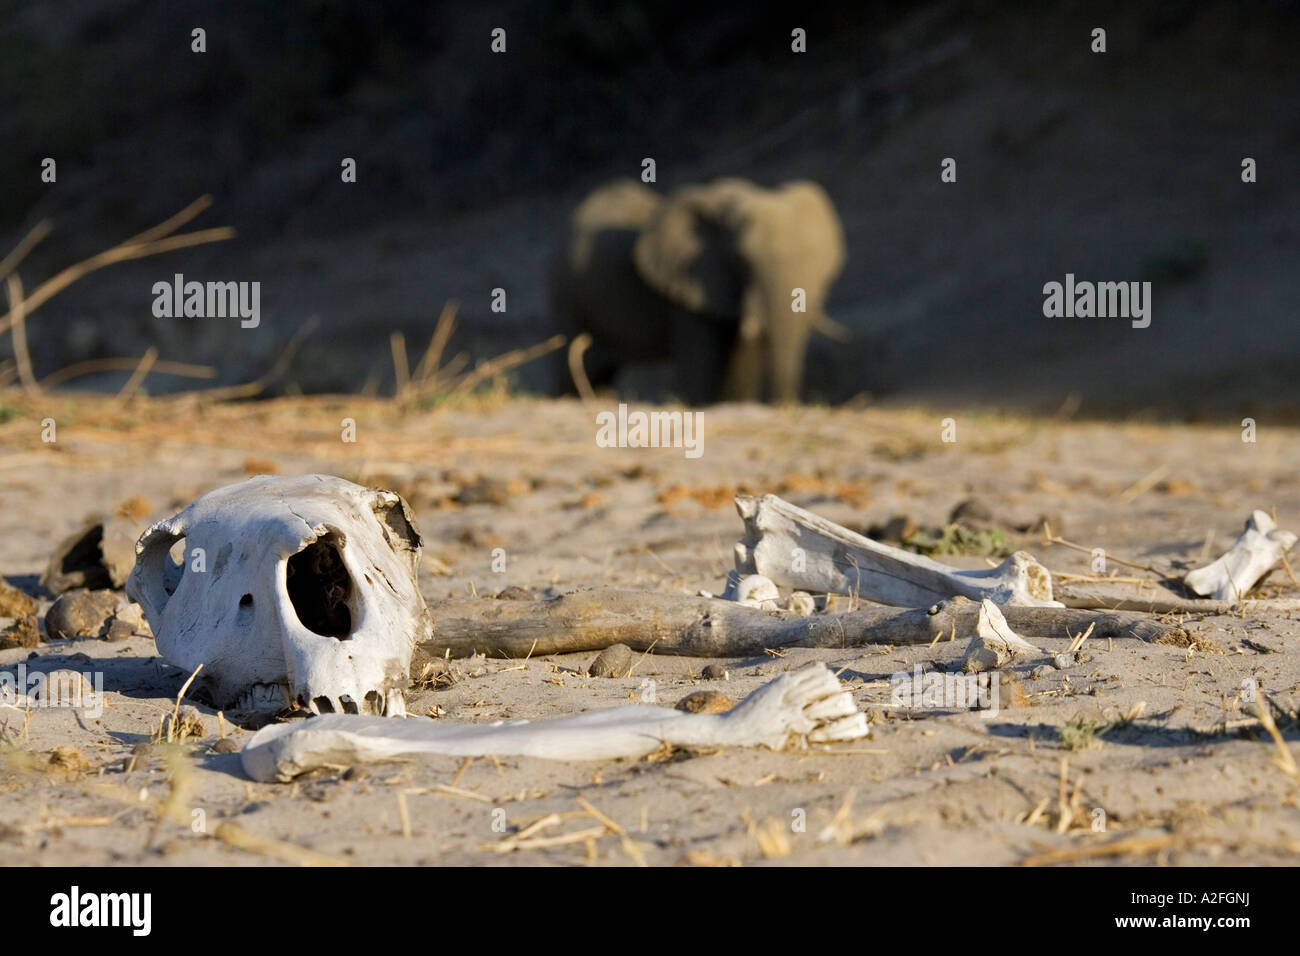 Life and death in the dry river bed of Boteti. Elephant, skull and bones. Makgadikgadi Pan National Park, Botswana, Africa Stock Photo